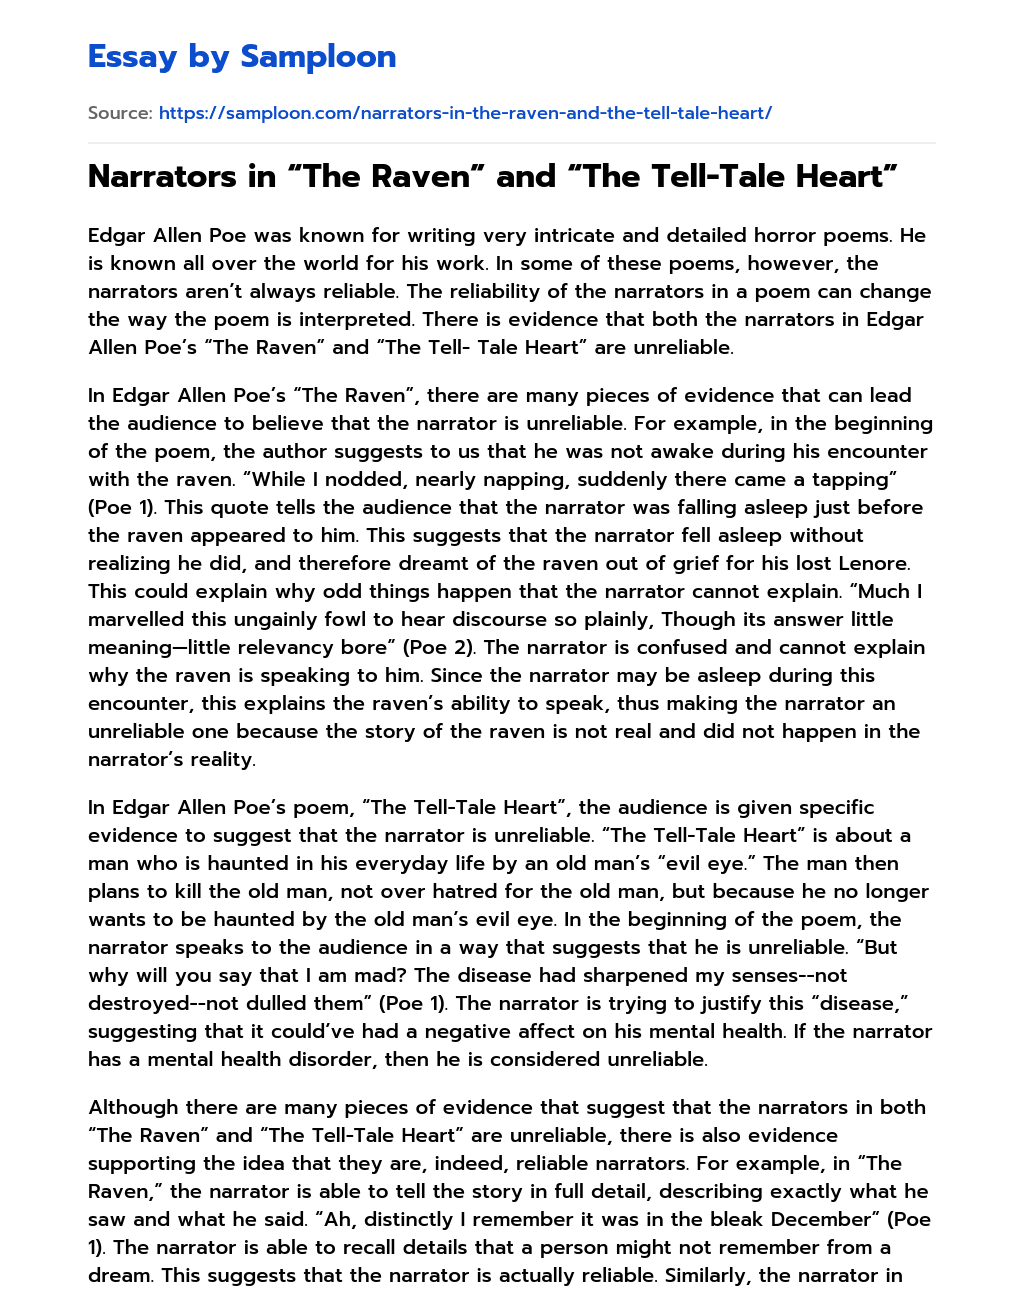 Narrators in “The Raven” and “The Tell-Tale Heart” essay